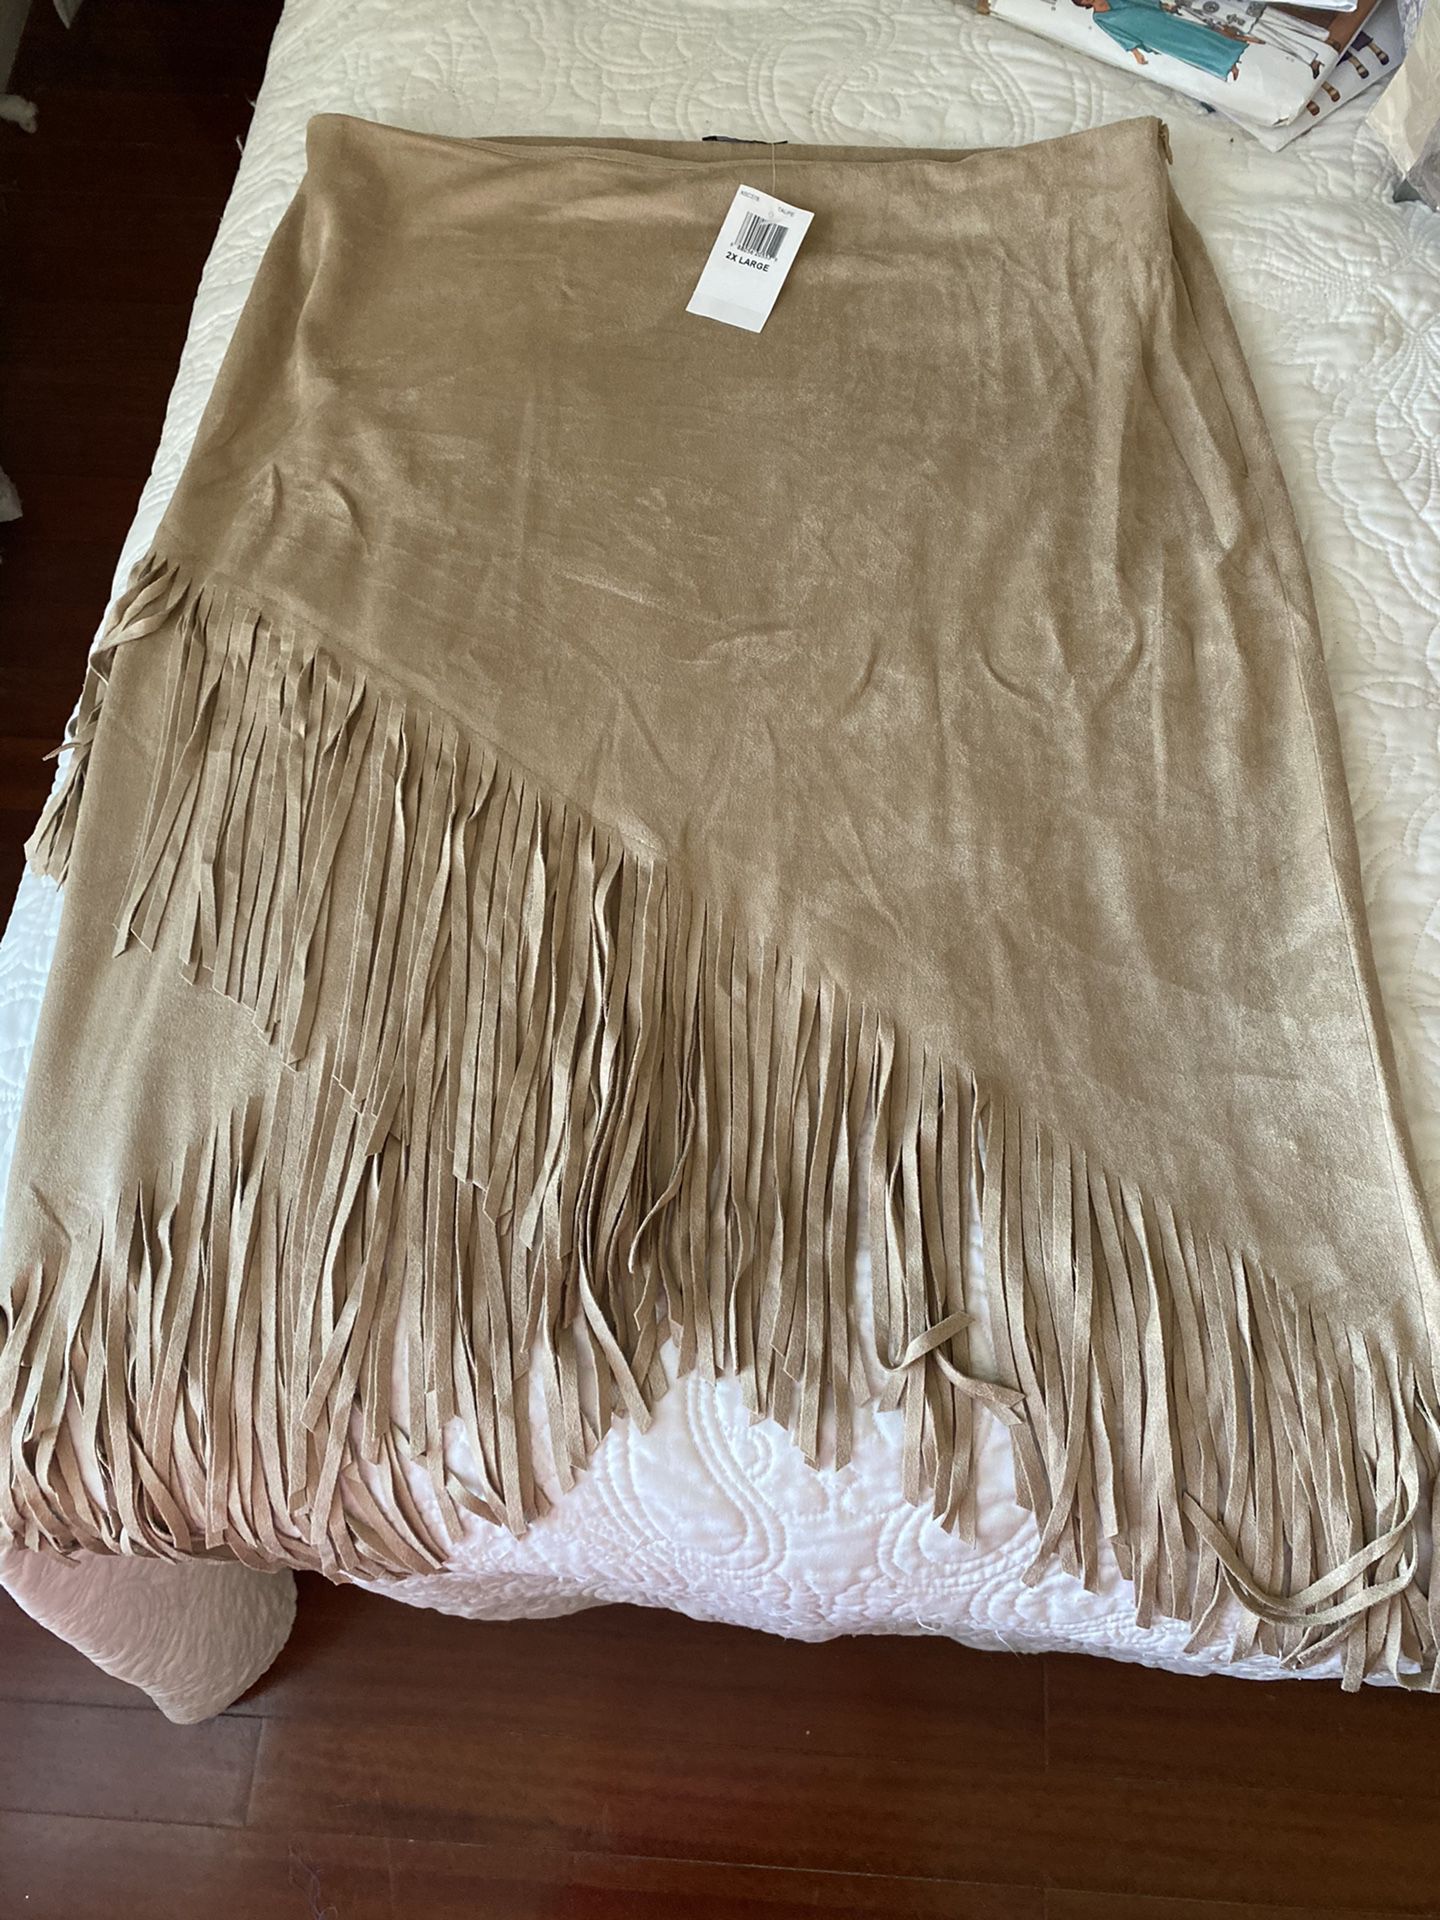 From Nordstrom, Soprano faux suede natural beige color skirt w/ cross cross fringe bottom,